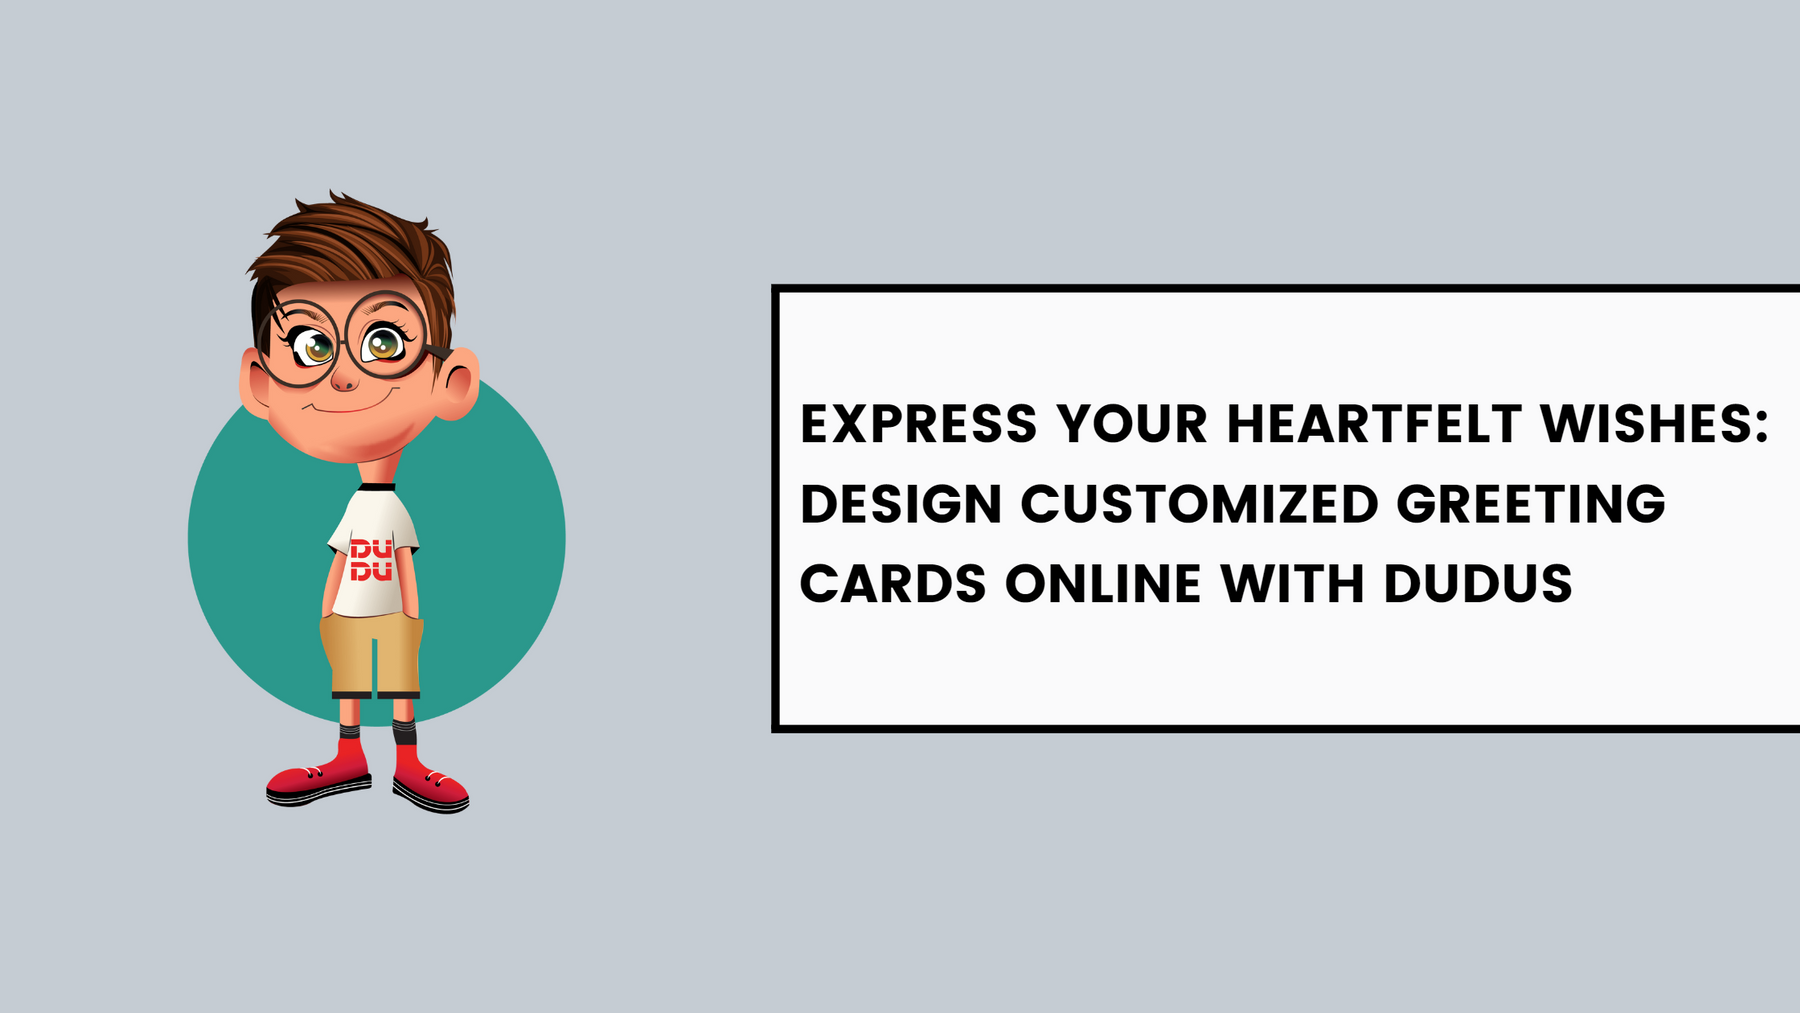 Express Your Heartfelt Wishes: Design Customized Greeting Cards Online with Dudus